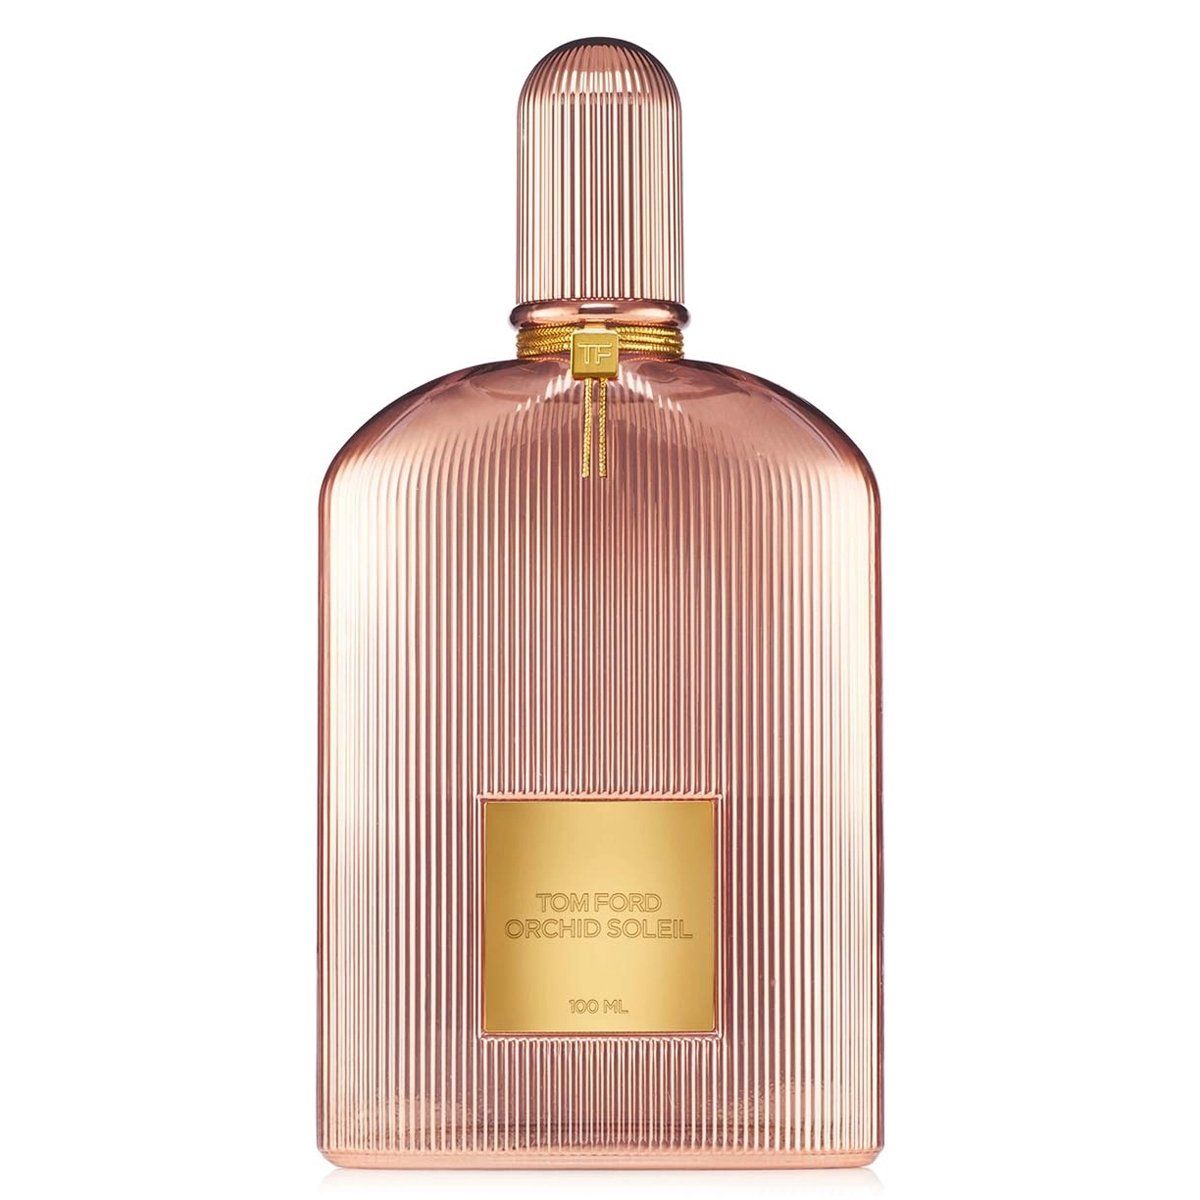  Tom Ford Orchid Soleil 